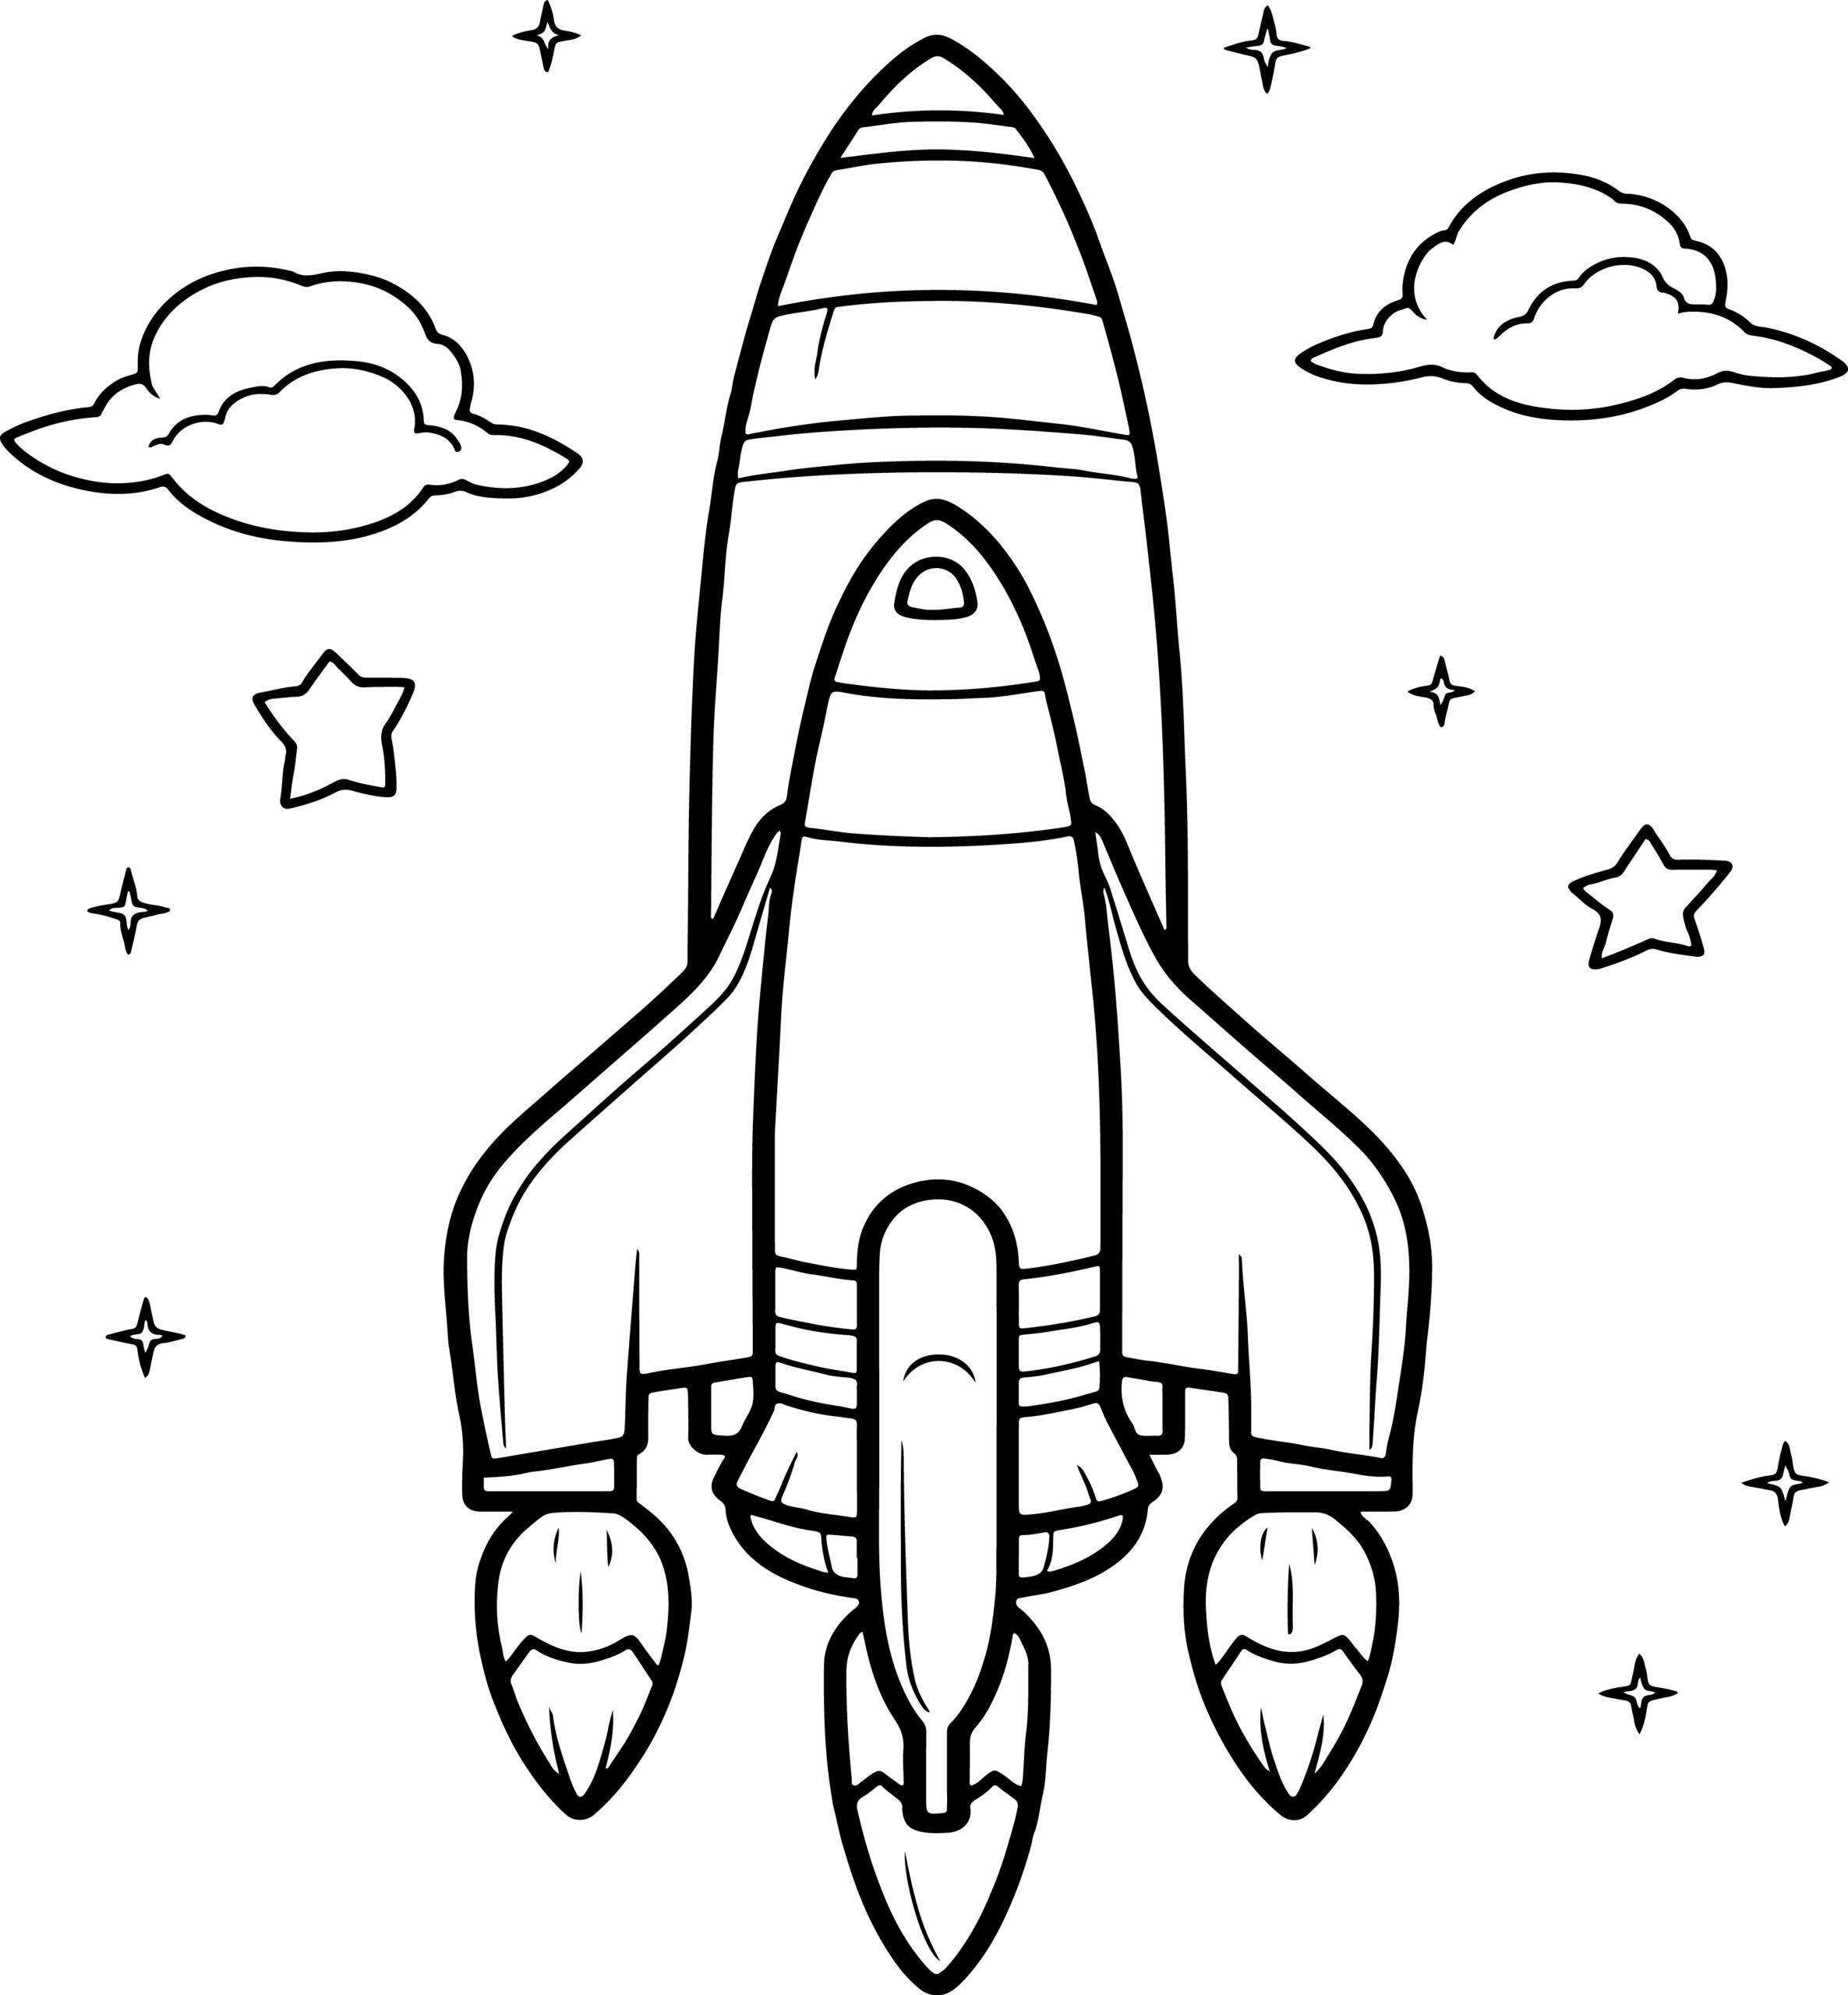 Rocket coloring book the ultimate fantastic outer space coloring pages with planets astronauts made by teachers